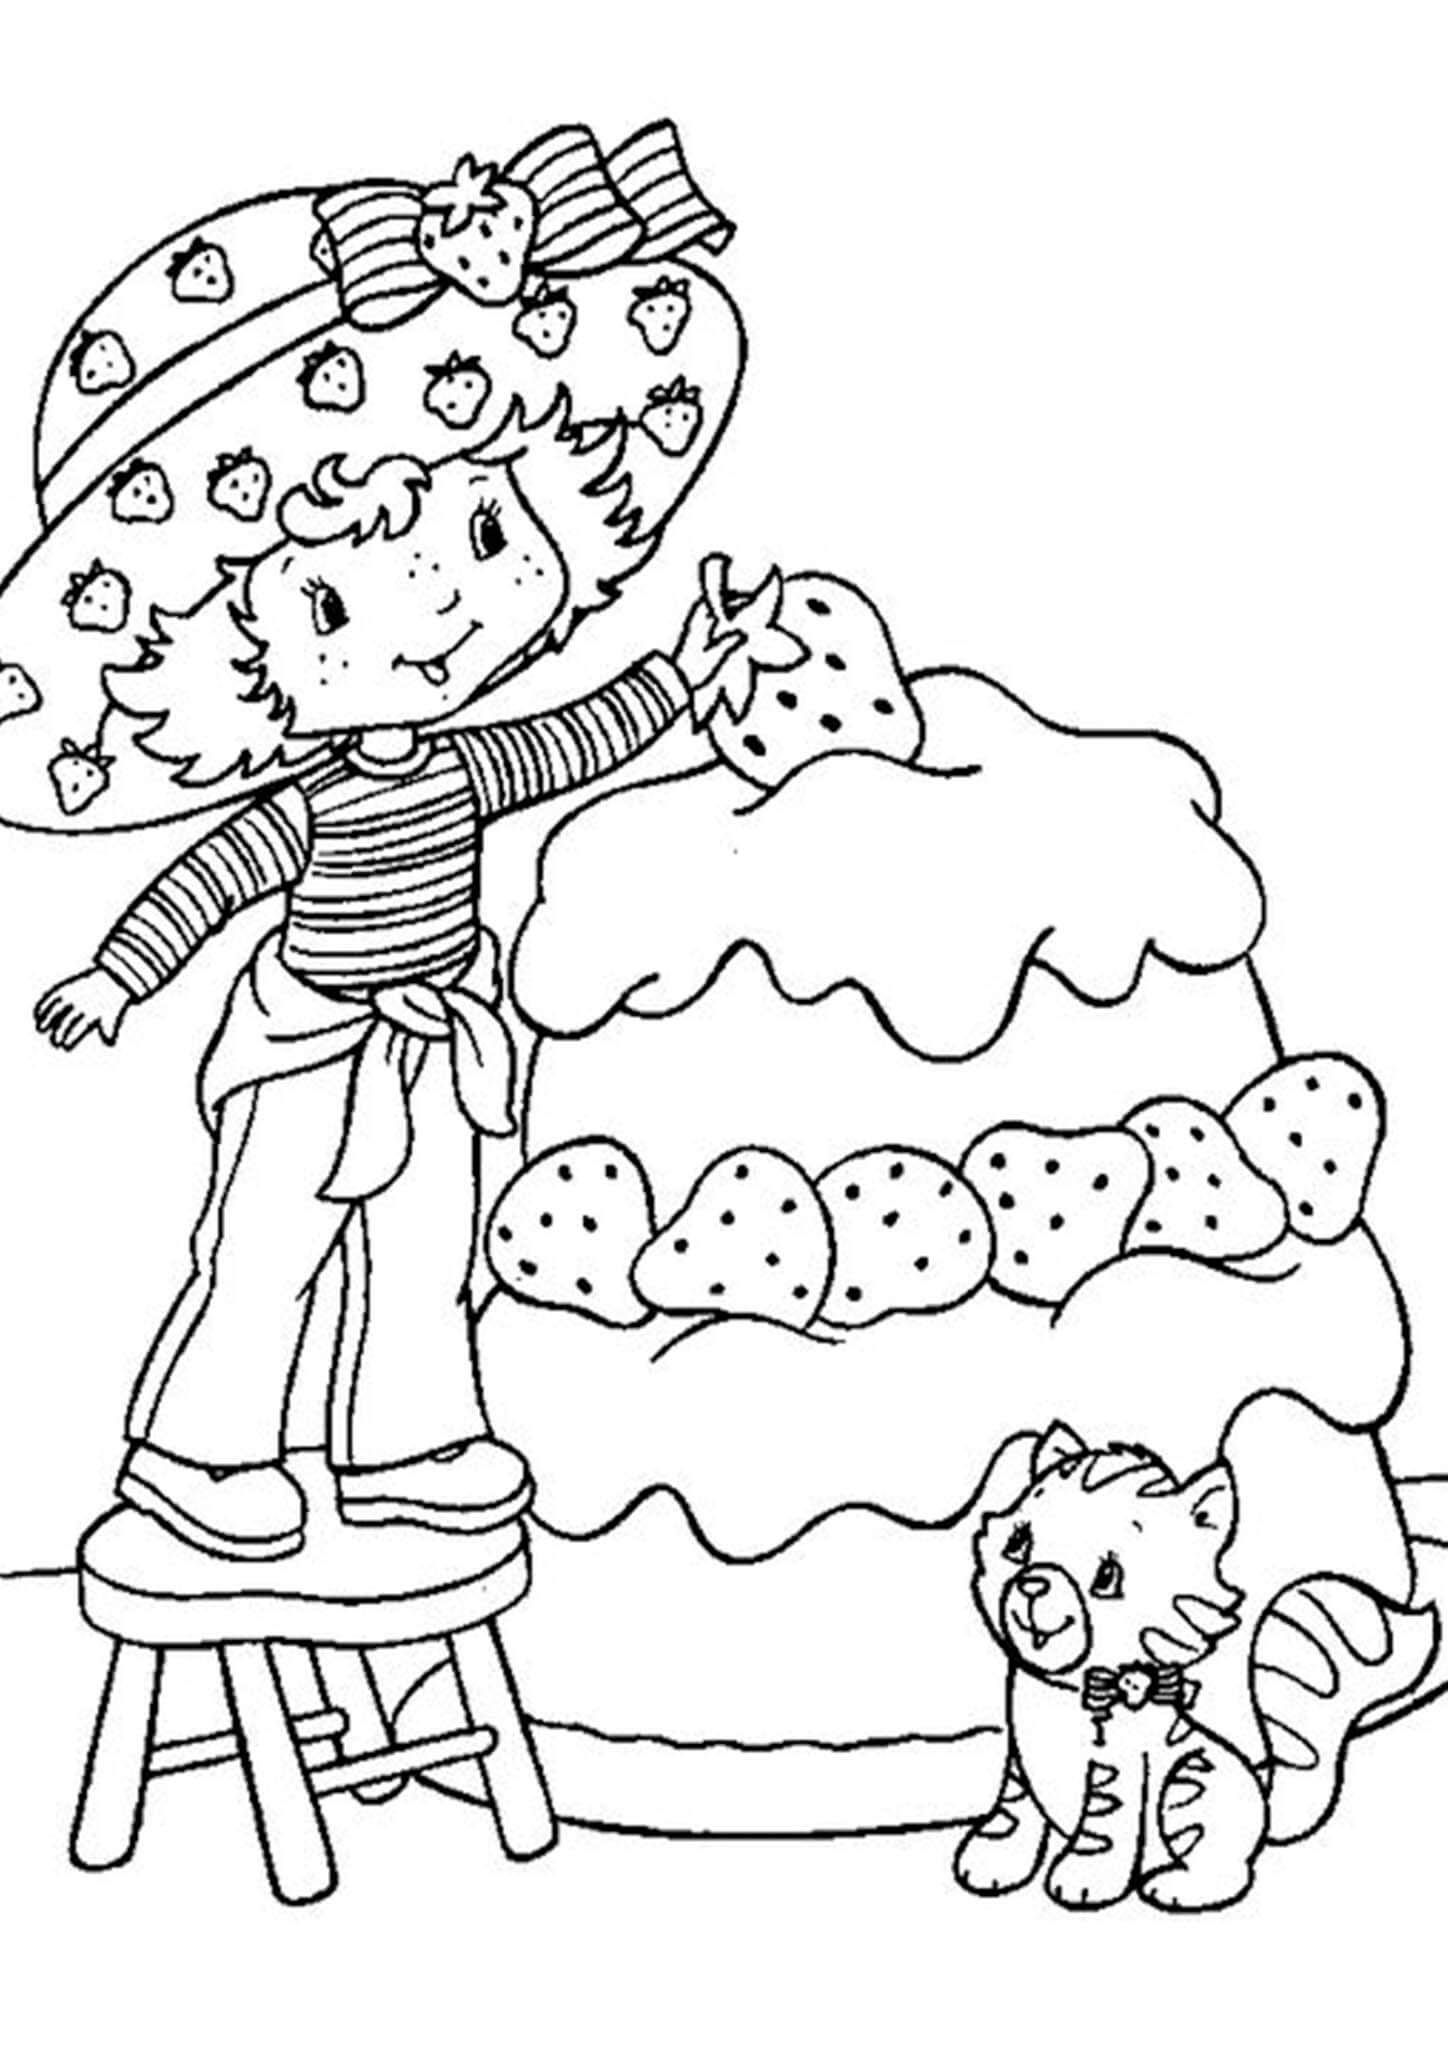 Free easy to print strawberry shortcake coloring pages hello kitty colouring pages cute coloring pages strawberry shortcake coloring pages